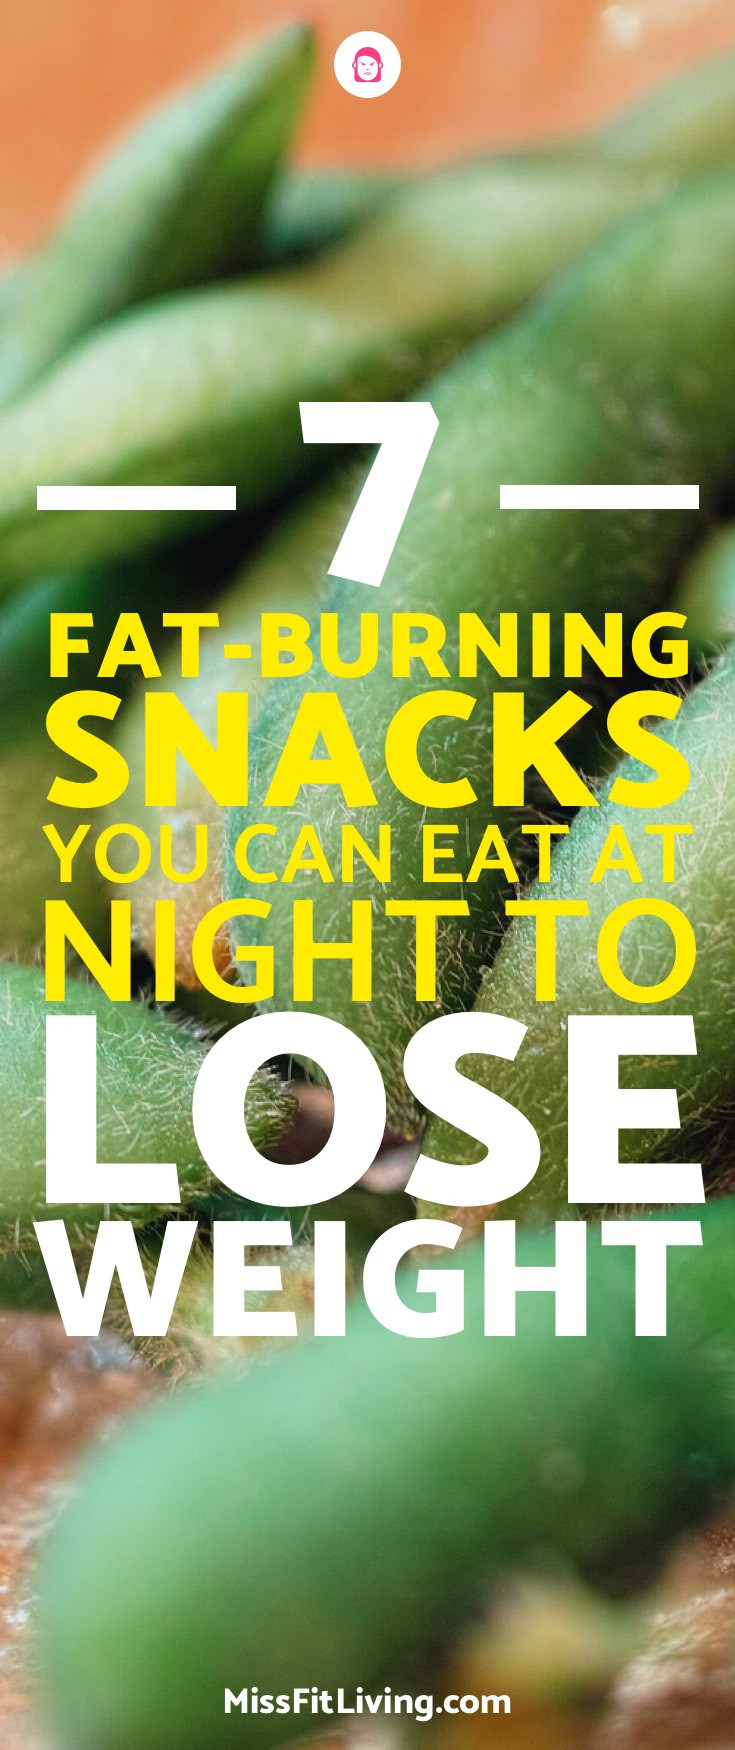 Healthy Snacks For Weight Loss At Night
 7 Fat Burning Snacks You Can Eat at Night to Lose Weight